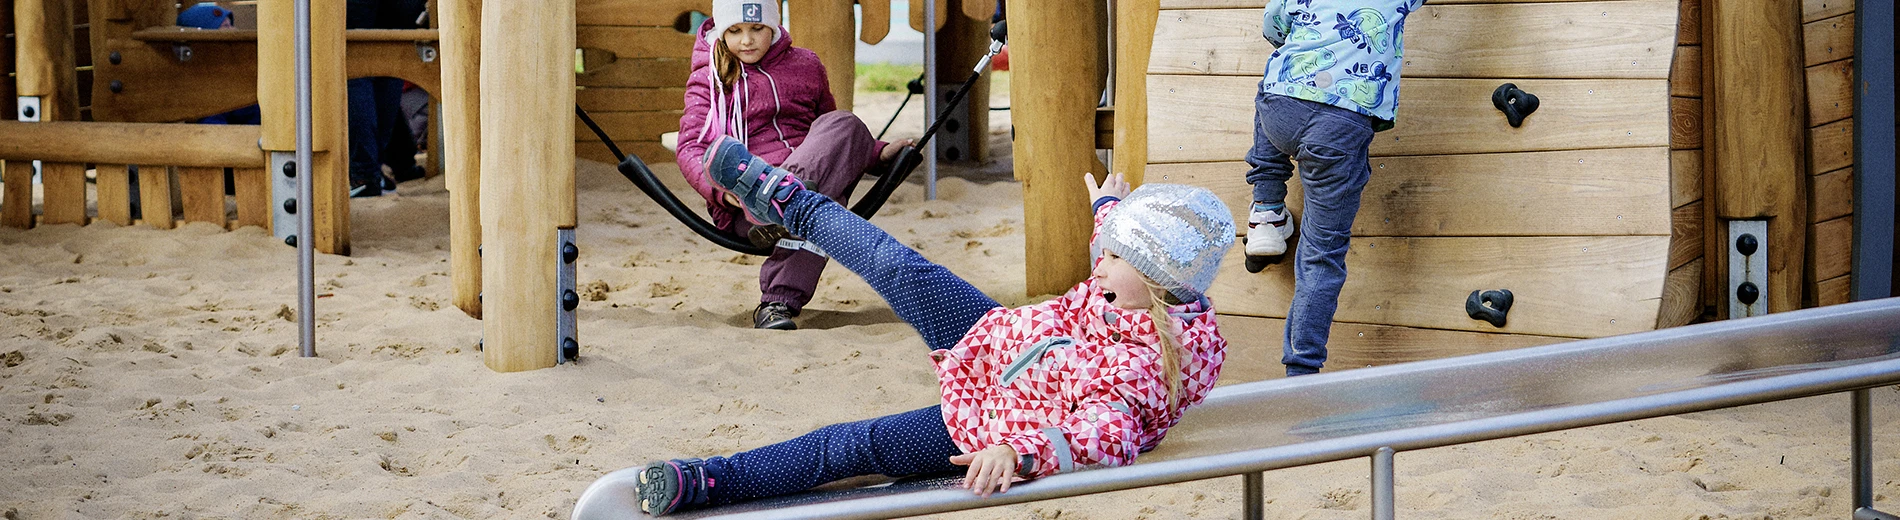 Image of a girl sliding down a playground slide